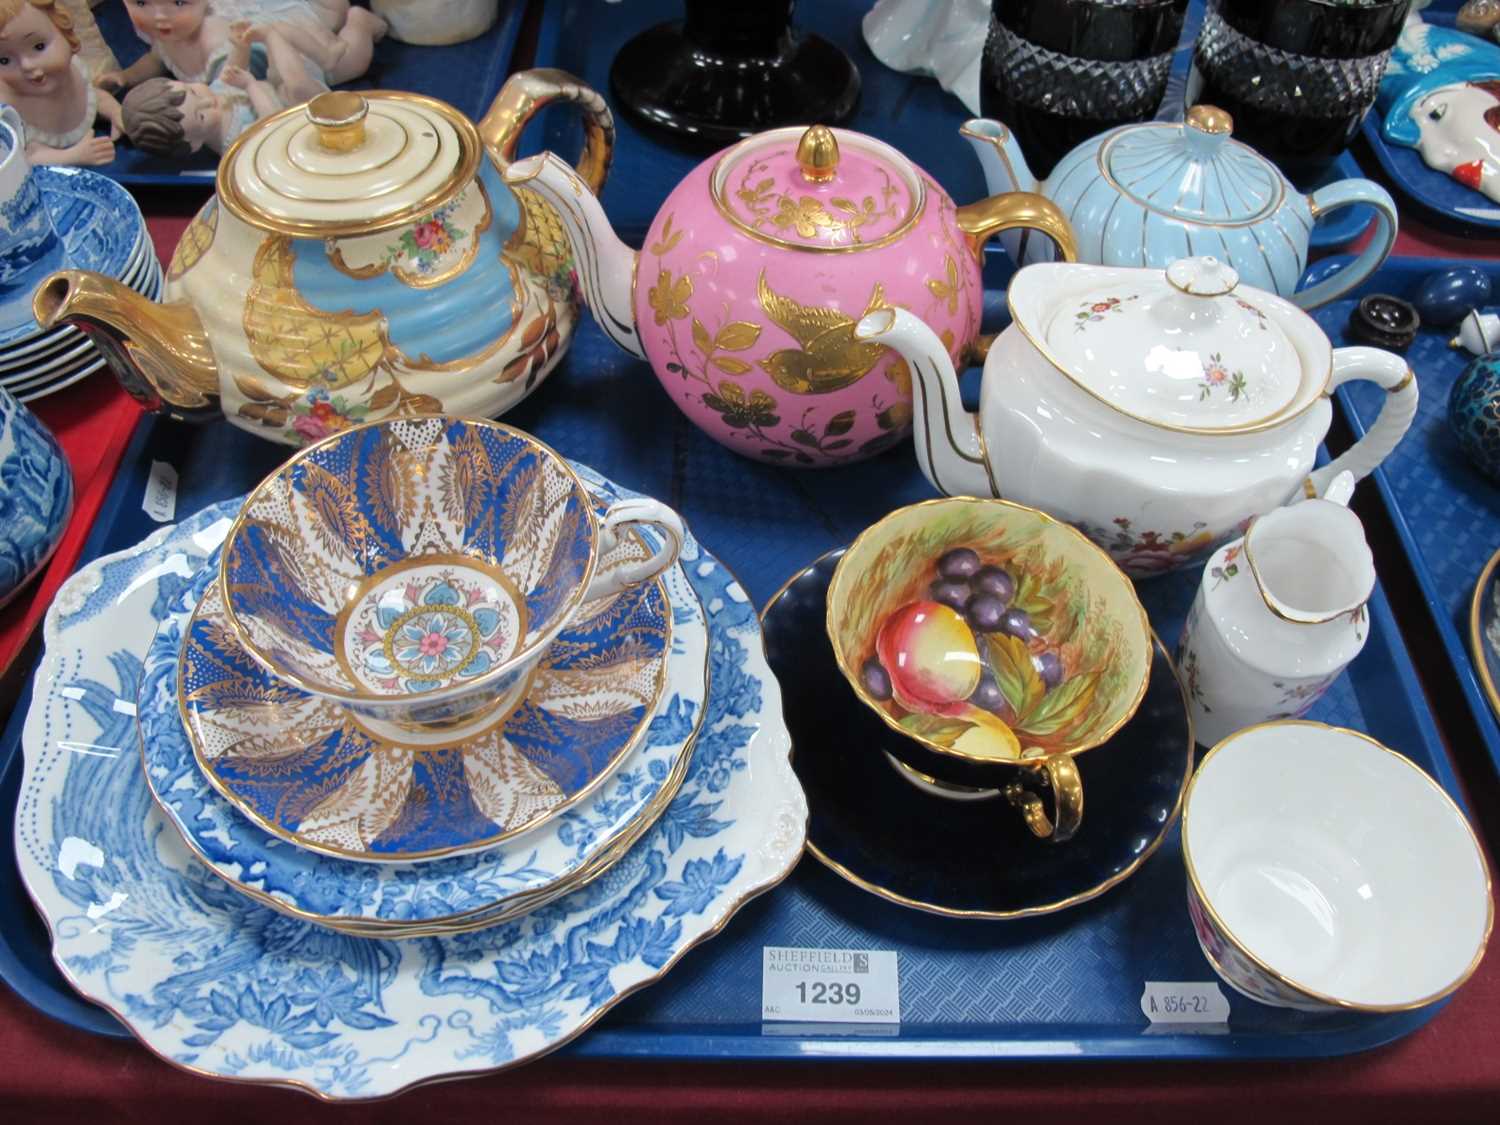 Royal Crown Derby 'Derby Posies' Teapot, Milk and Sugar, and 'Old Avesbury' (blue) plates,